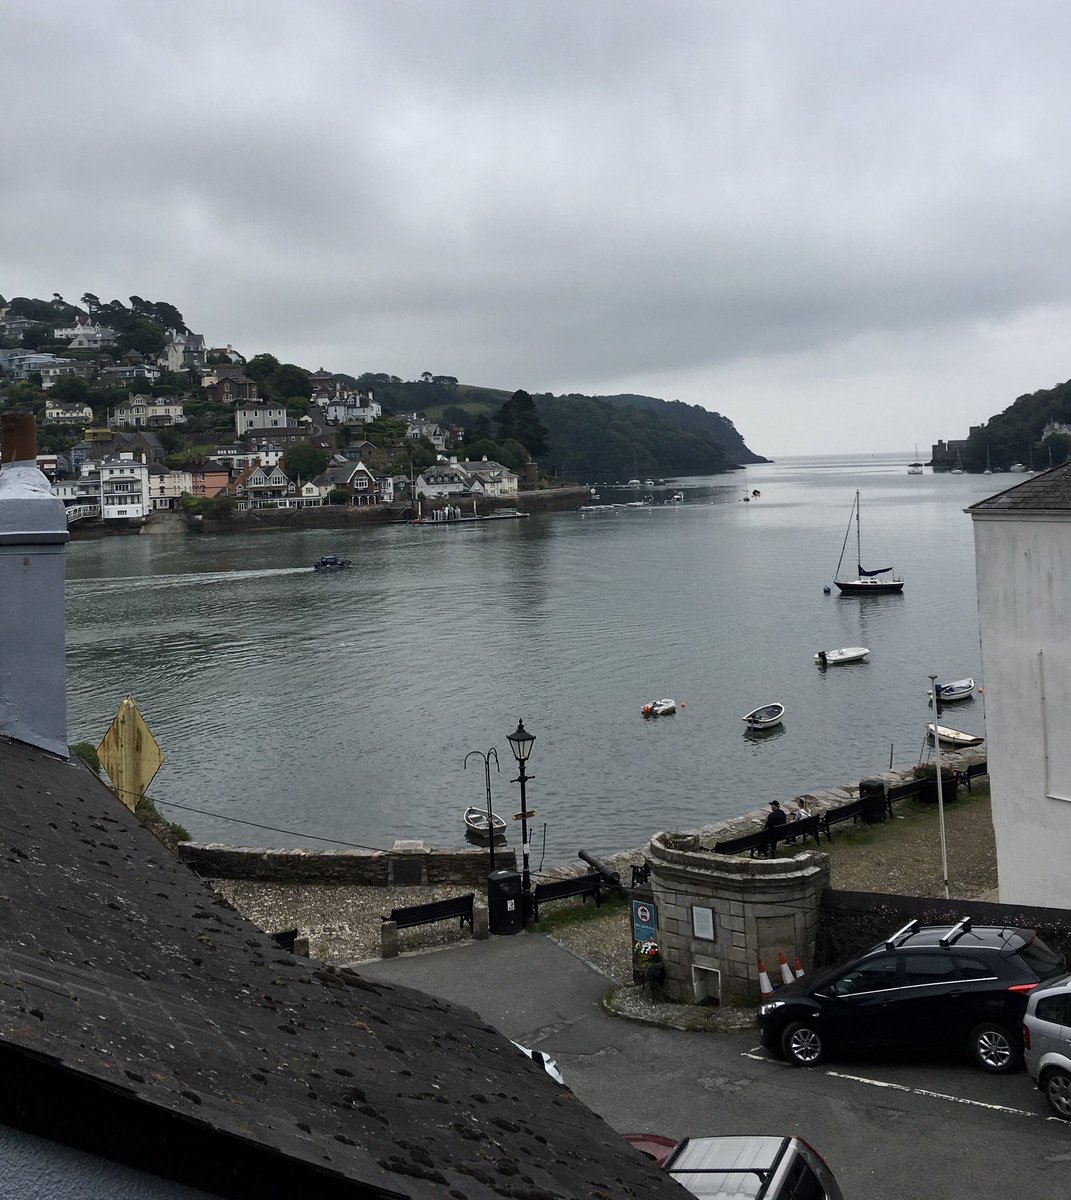 River Dart looking as beautiful as ever today from above town. Never ever seen car park spaces in June though #signofthetimes #dartmouth